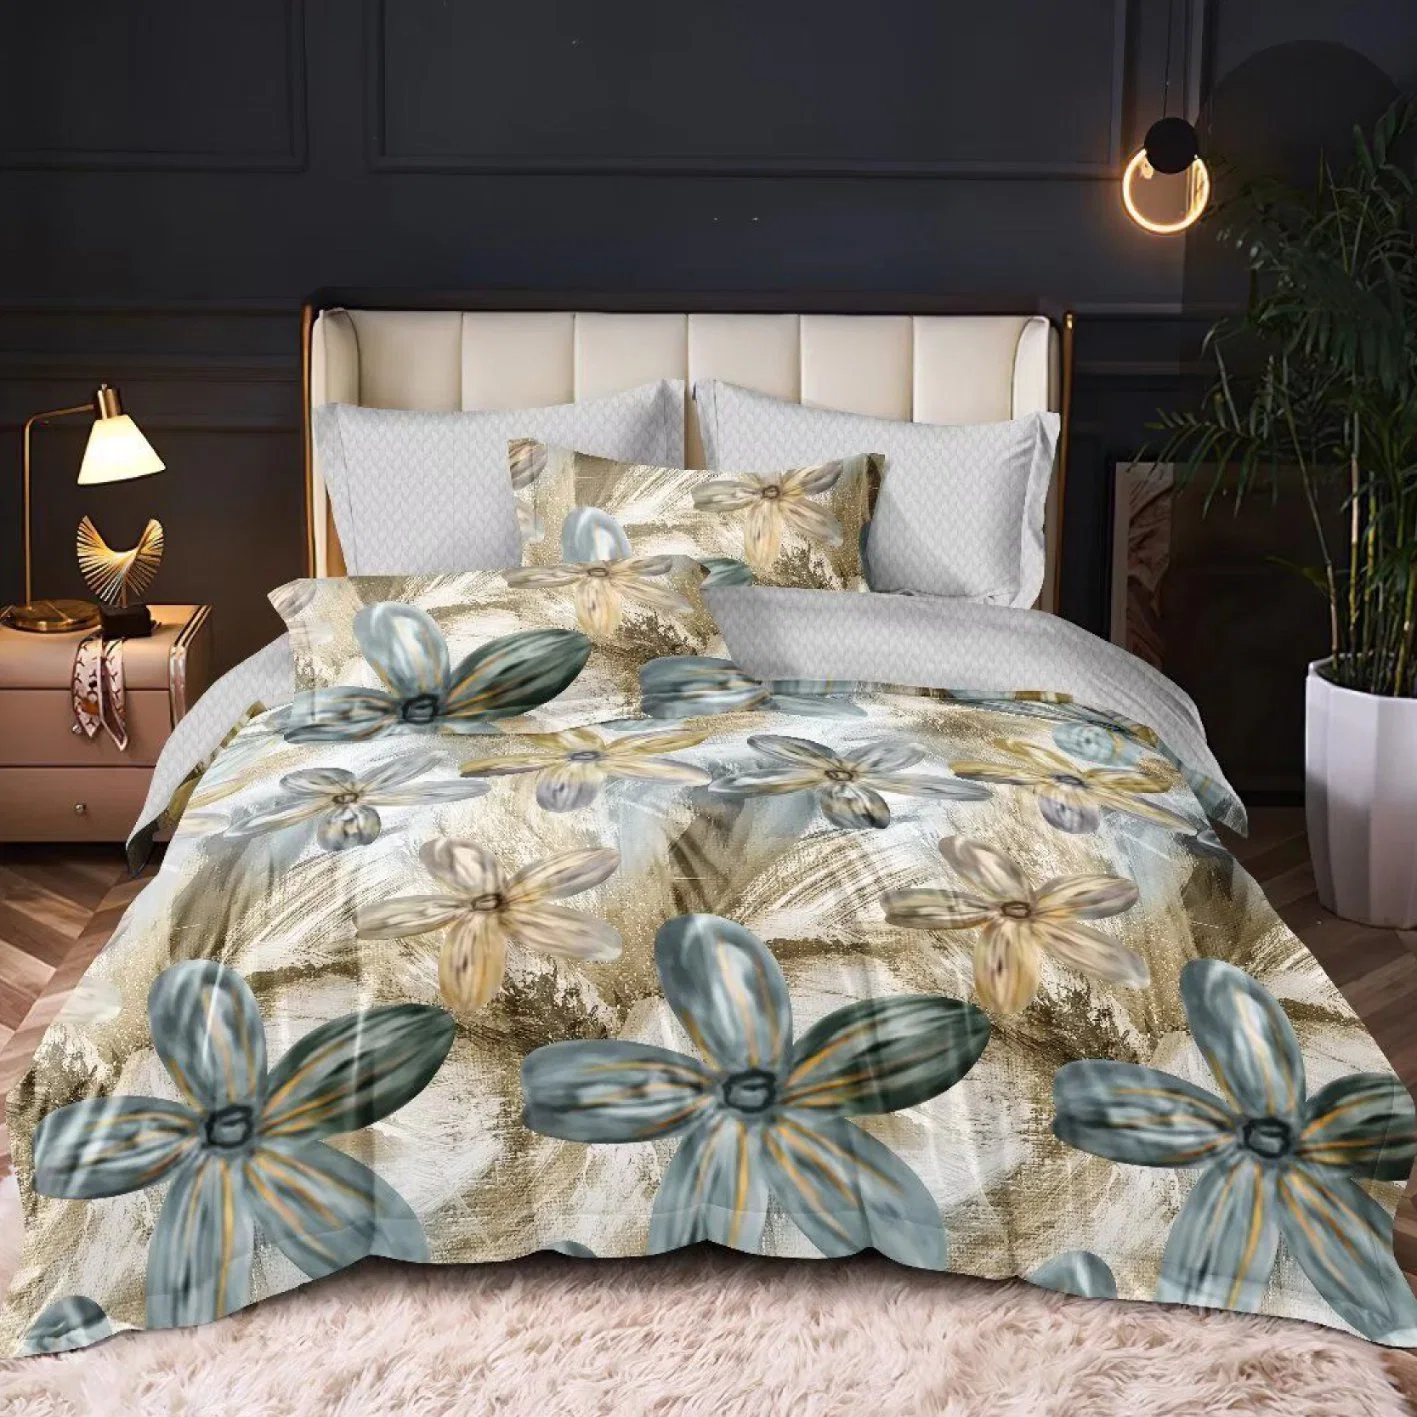 Comforter Set Bed Linen Collection with Microfiber Polyester Sheets Customizable Pillowcase Home Textile Sanding Bedspread Bedding with Curtain